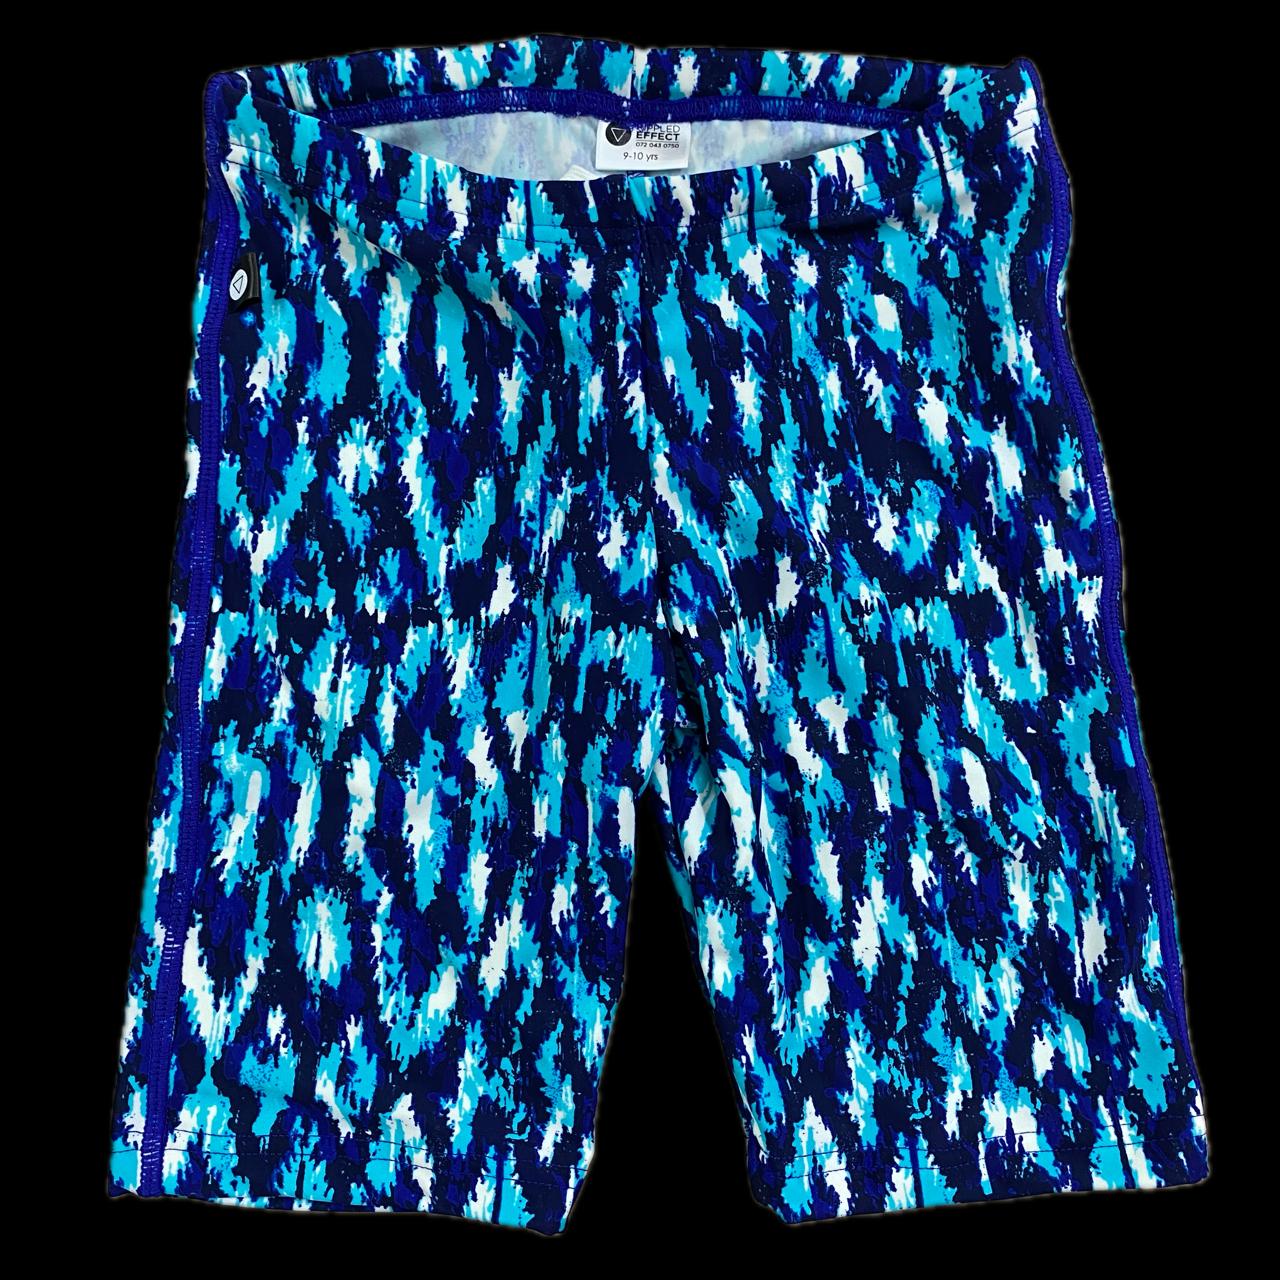 Rippled Effect Mens Jammers - Shades of Blue